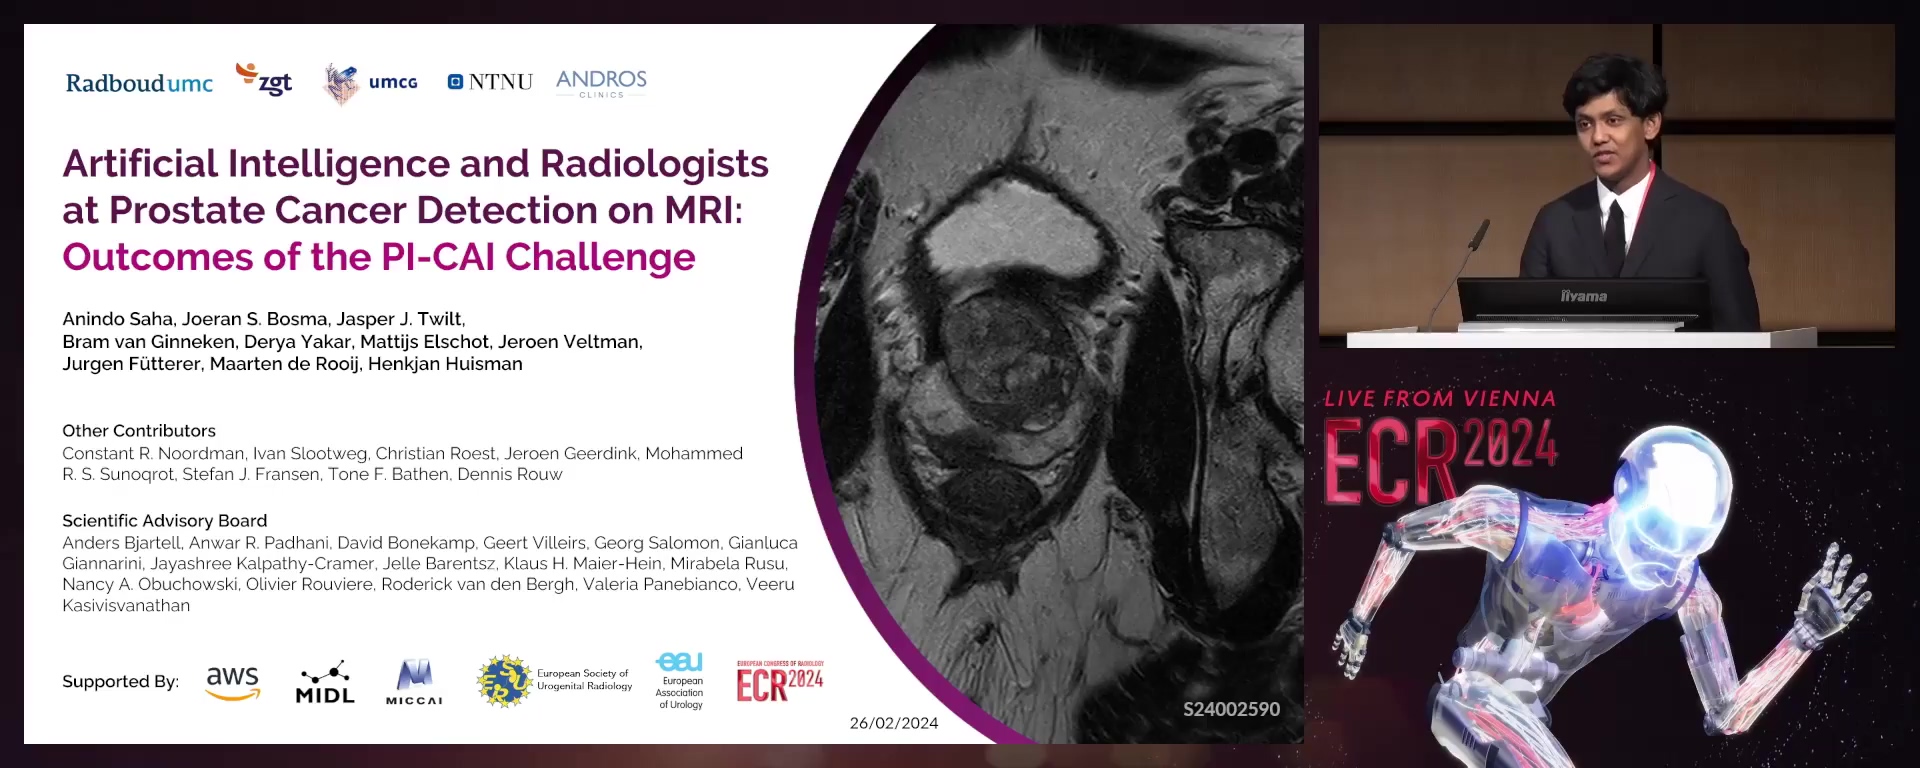 Artificial Intelligence and Radiologists at Prostate Cancer Detection in MRI : Outcomes of the PI-CAI Challenge